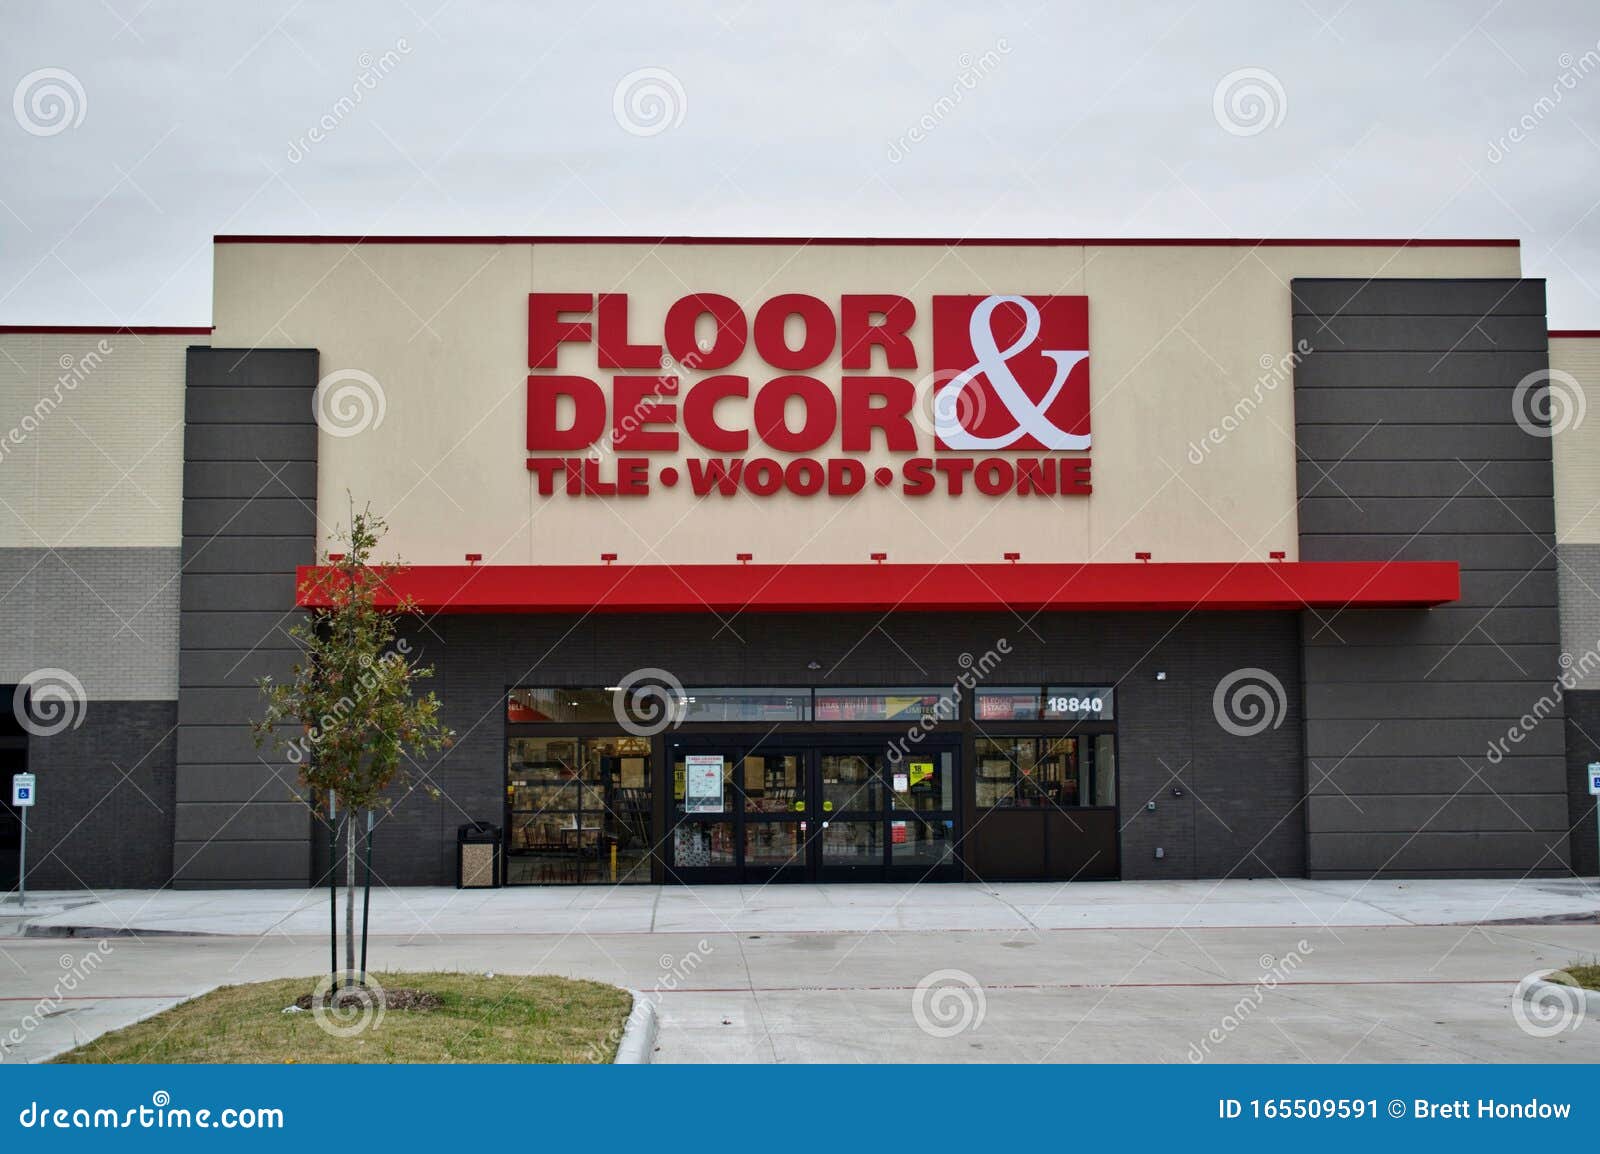 Floor Decor Storefront With Empty Parking Lot Editorial Photo